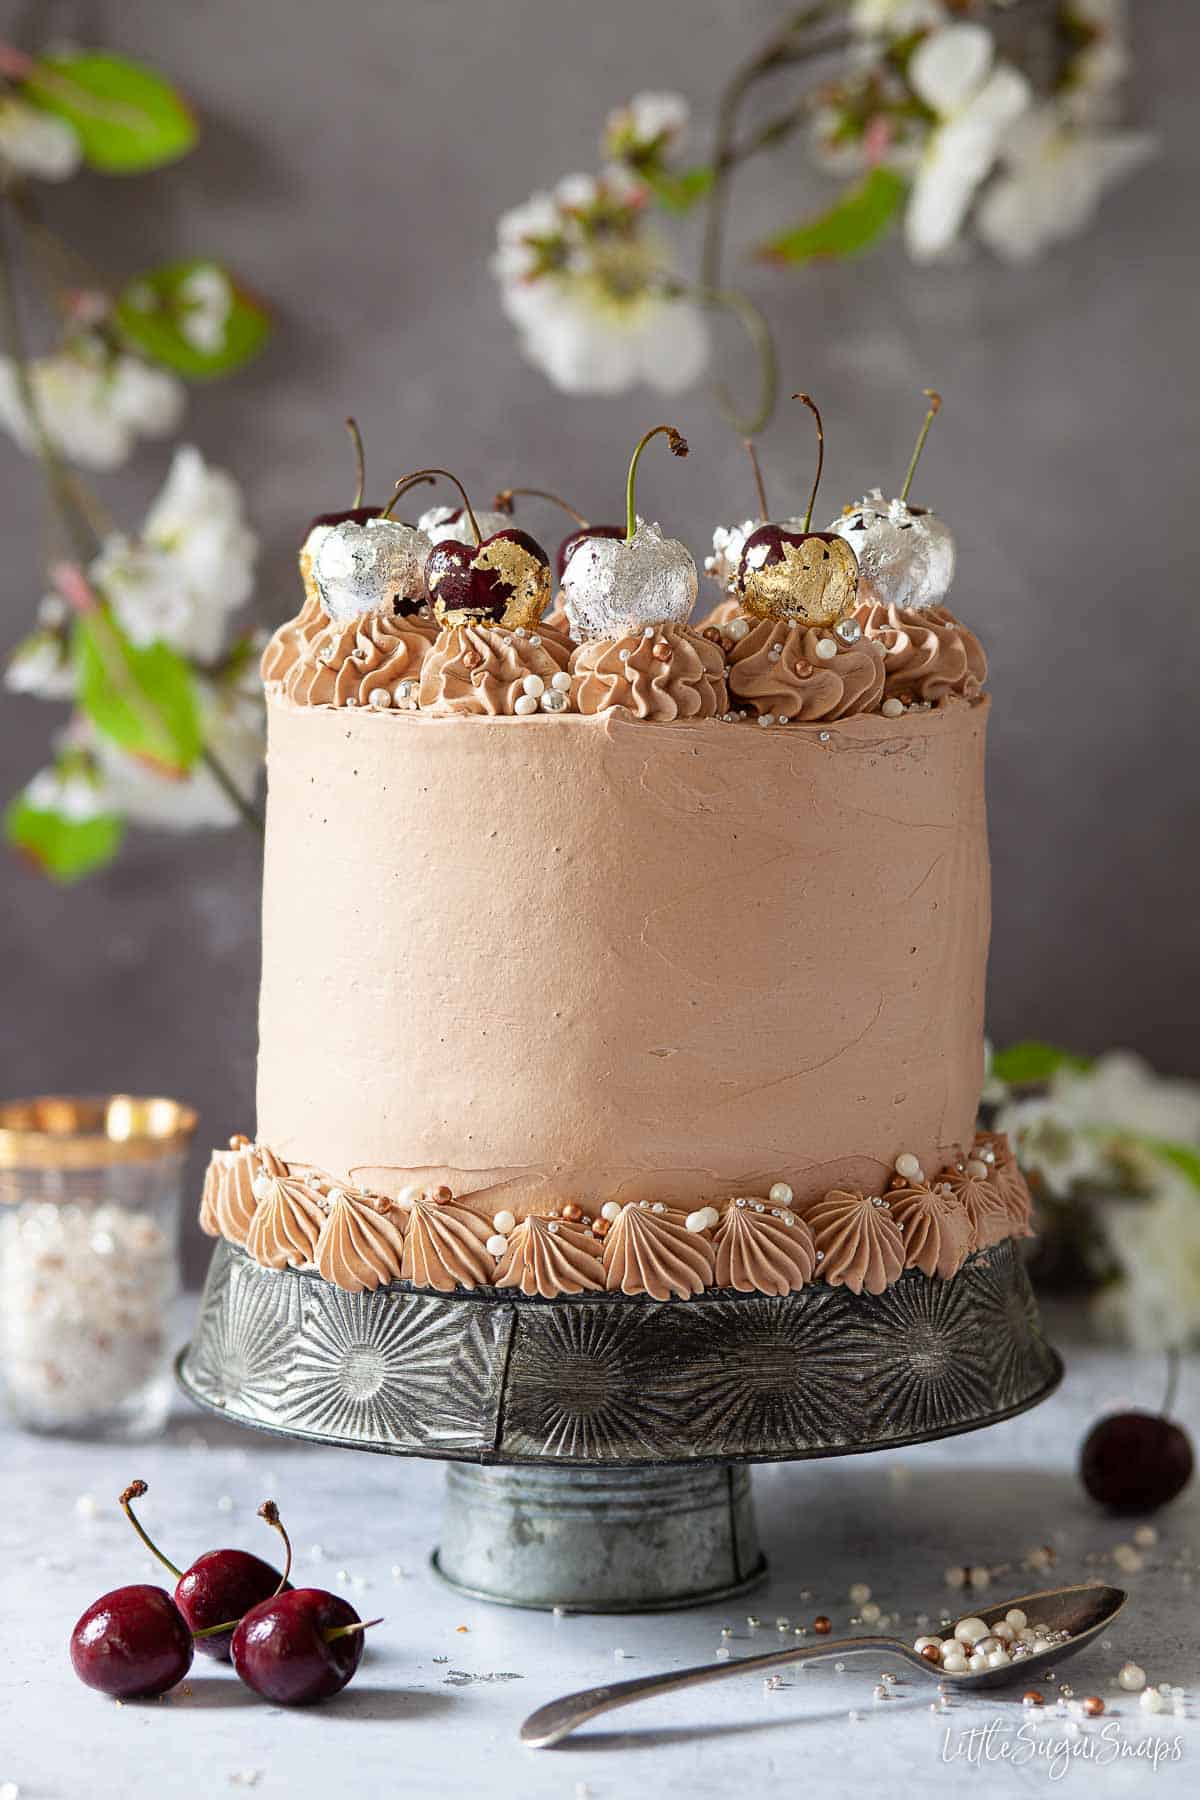 A chocolate cherry cake topped with gold and silver leaf wrapped cherries.